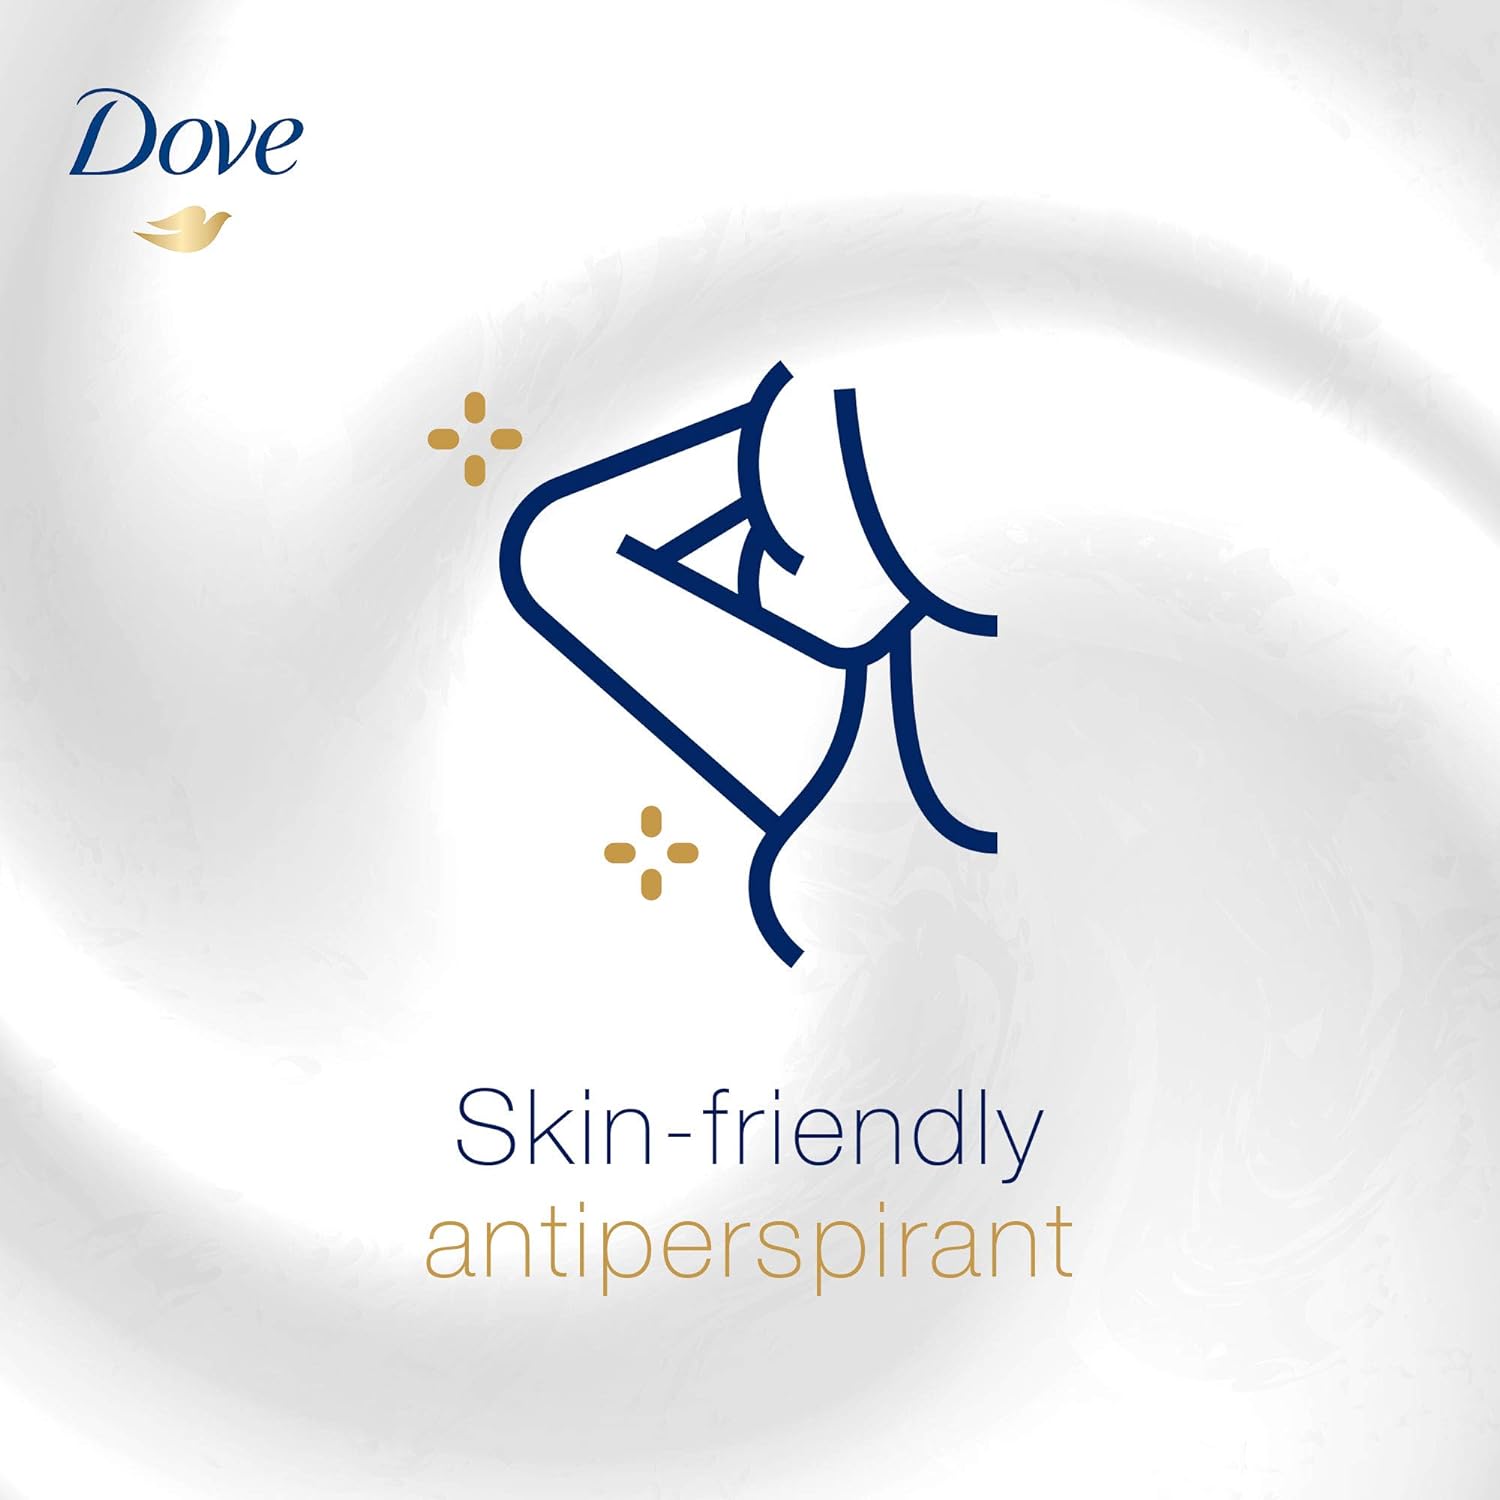 Dove Women Antiperspirant Deodorant Stick for refreshing 48-hour protection, Powder Soft, alcohol free, 40g